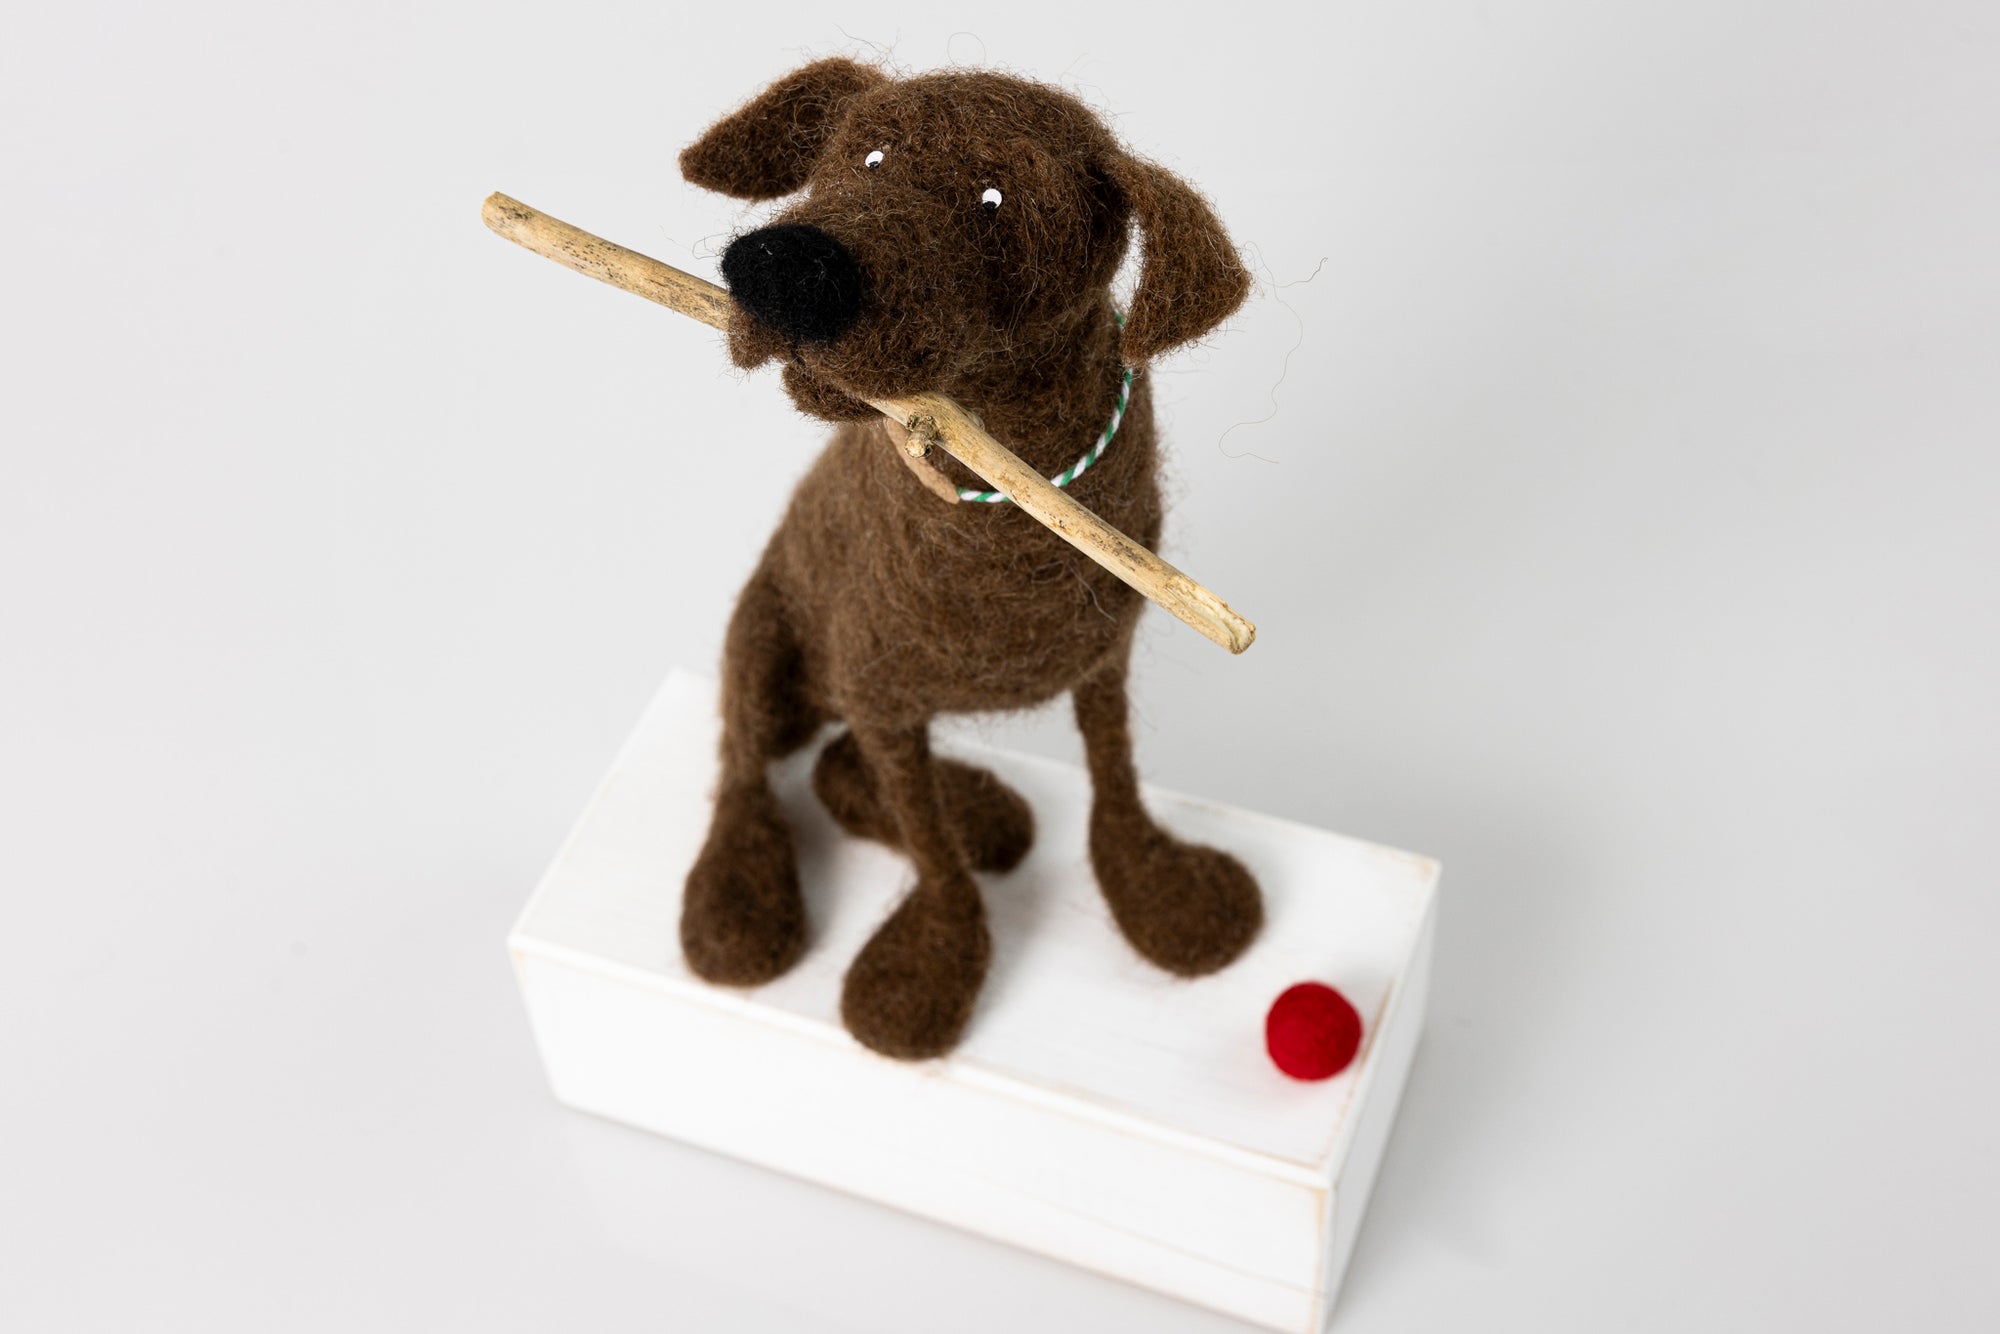 'Percy' needlefelt character dog by Kate Toms, available at Padstow Gallery, Cornwall